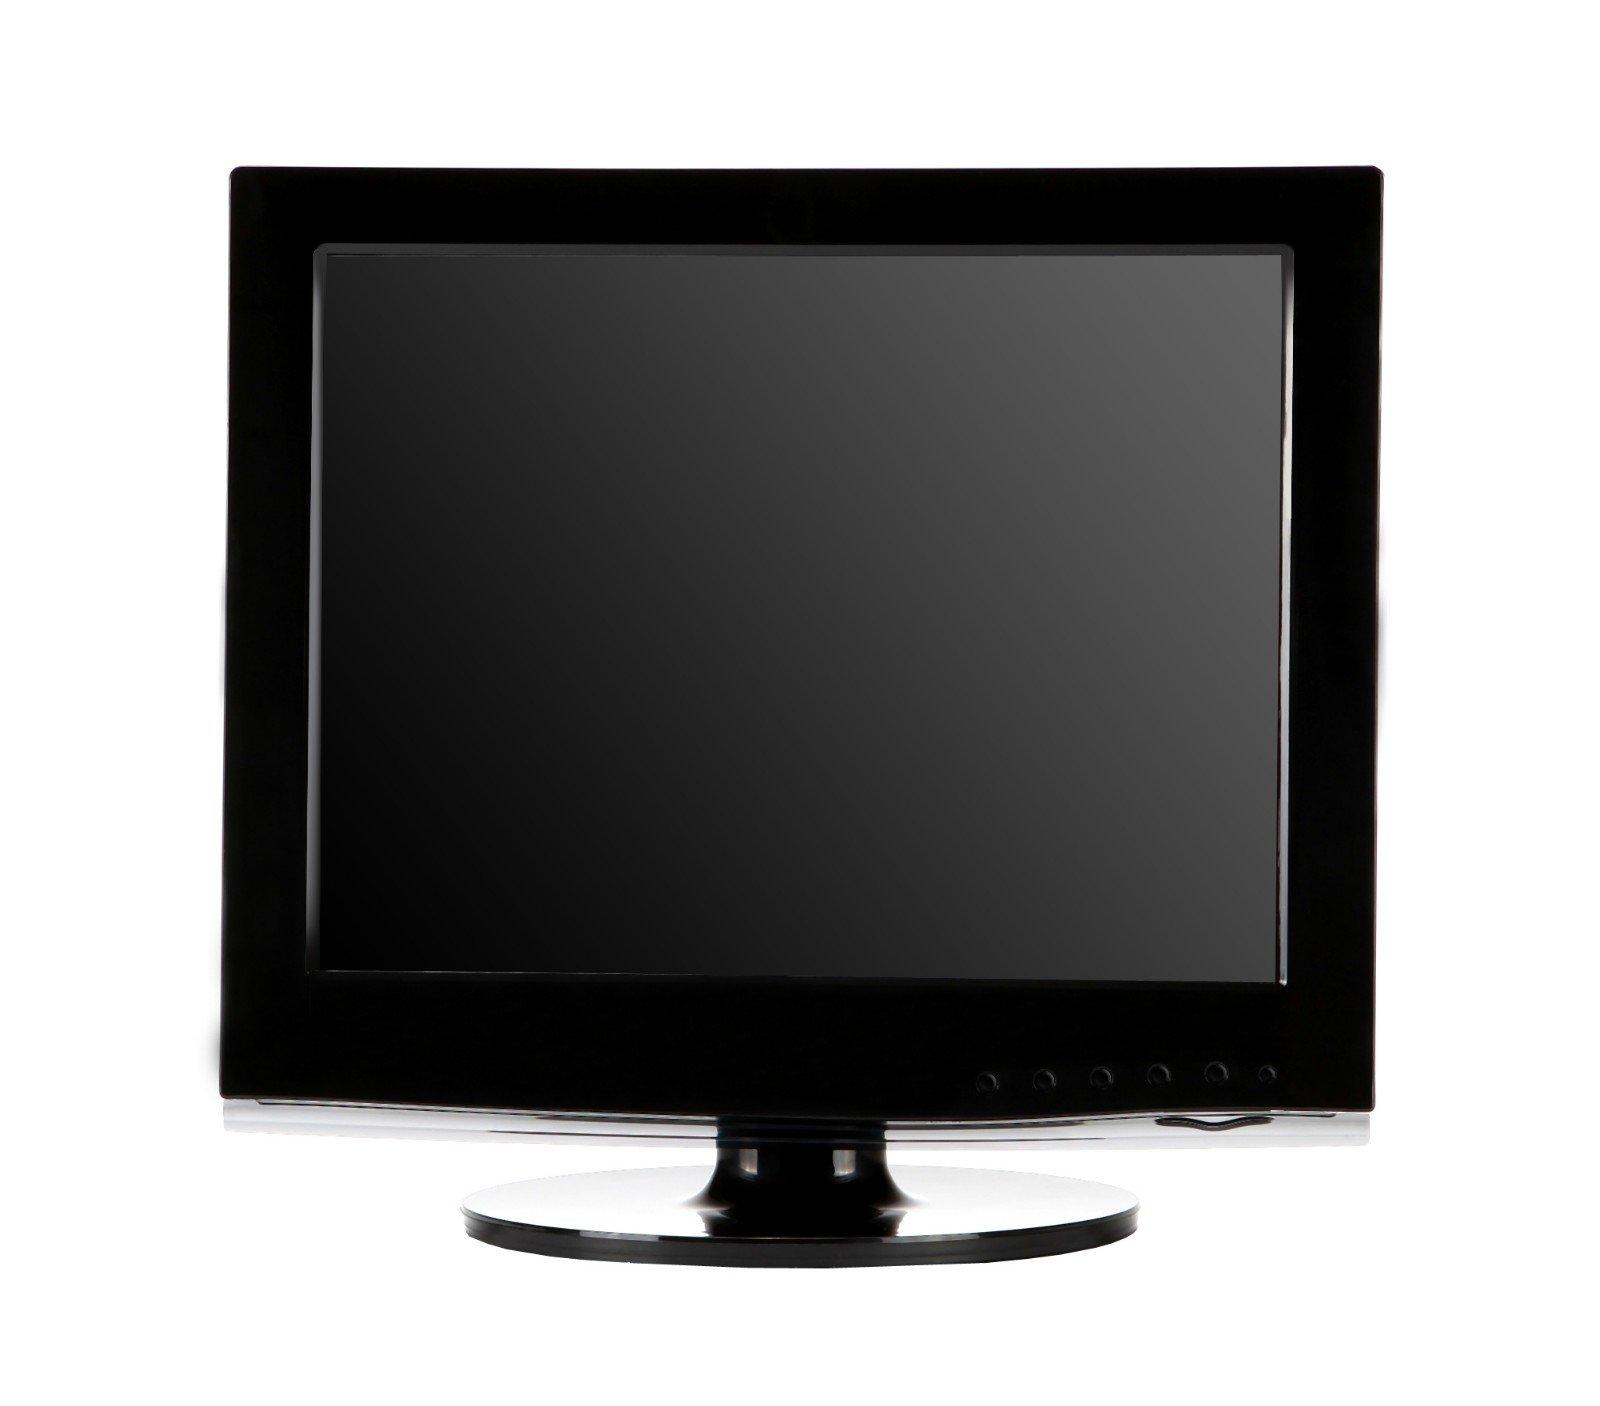 Xinyao LCD 15 inch tft lcd monitor with hdmi output for lcd screen